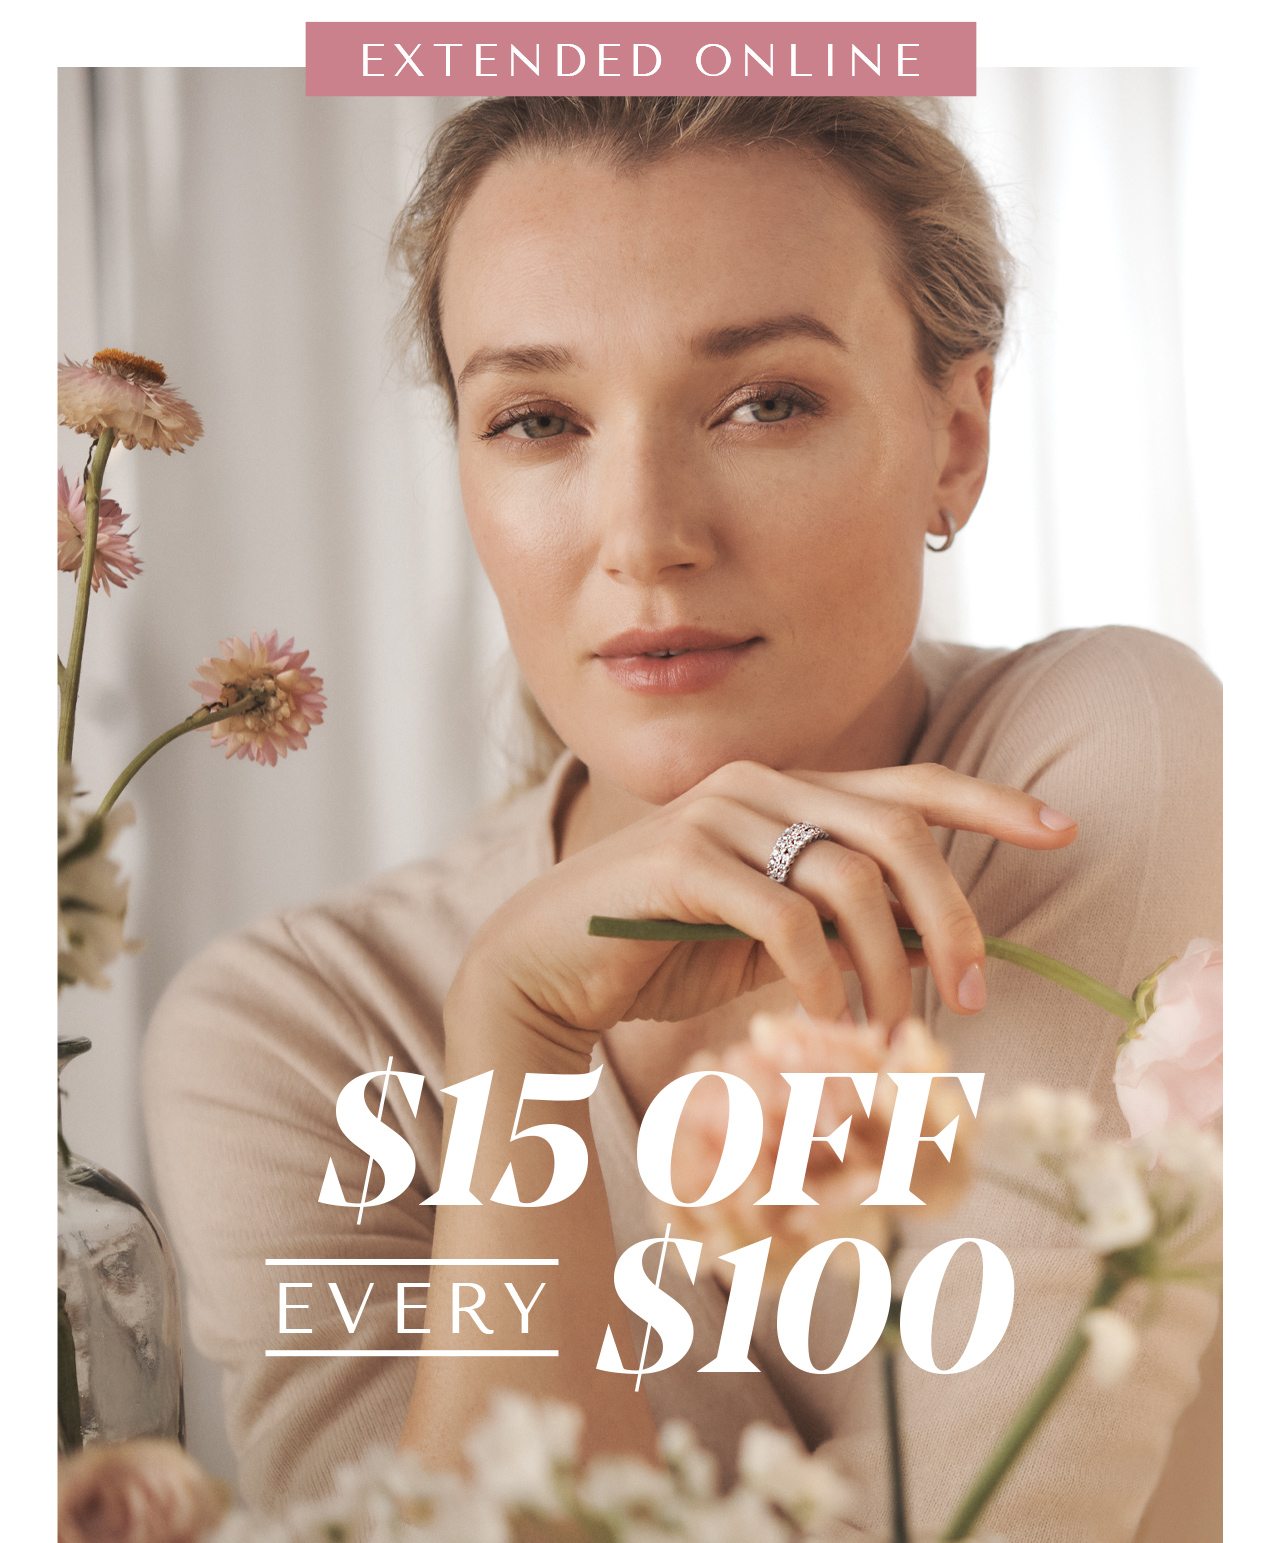 Extended Online! $15 Off Every $100 with code: HEYMAMA